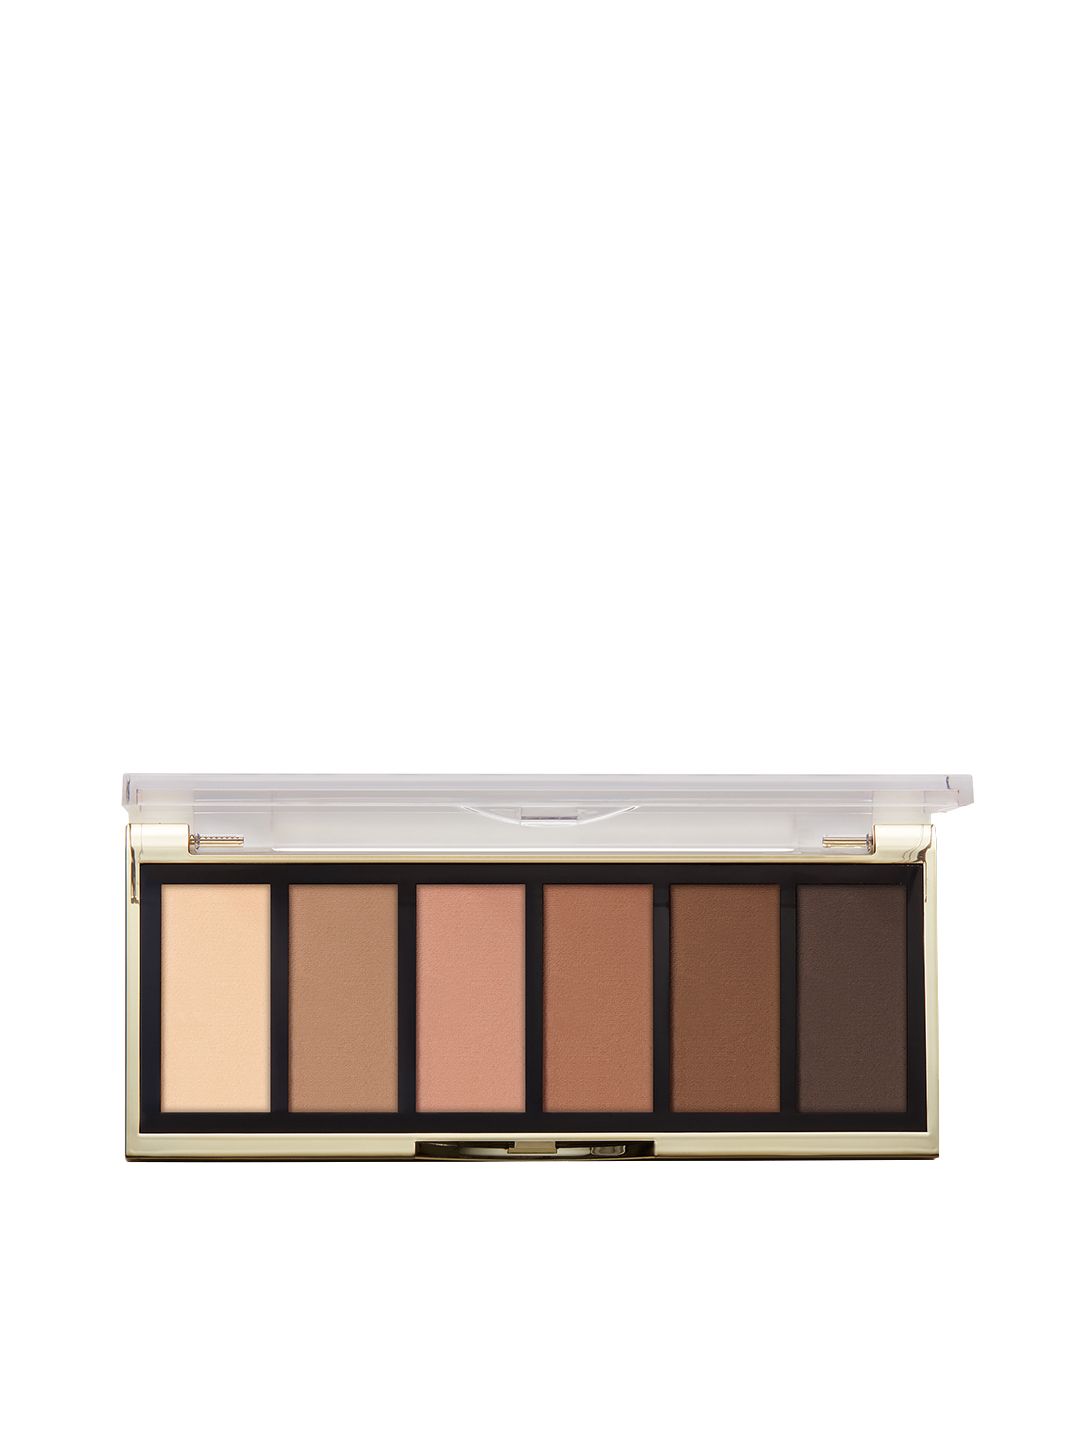 MILANI Most Wanted Eyeshadow Palettes - Partner in Crime 110 Price in India